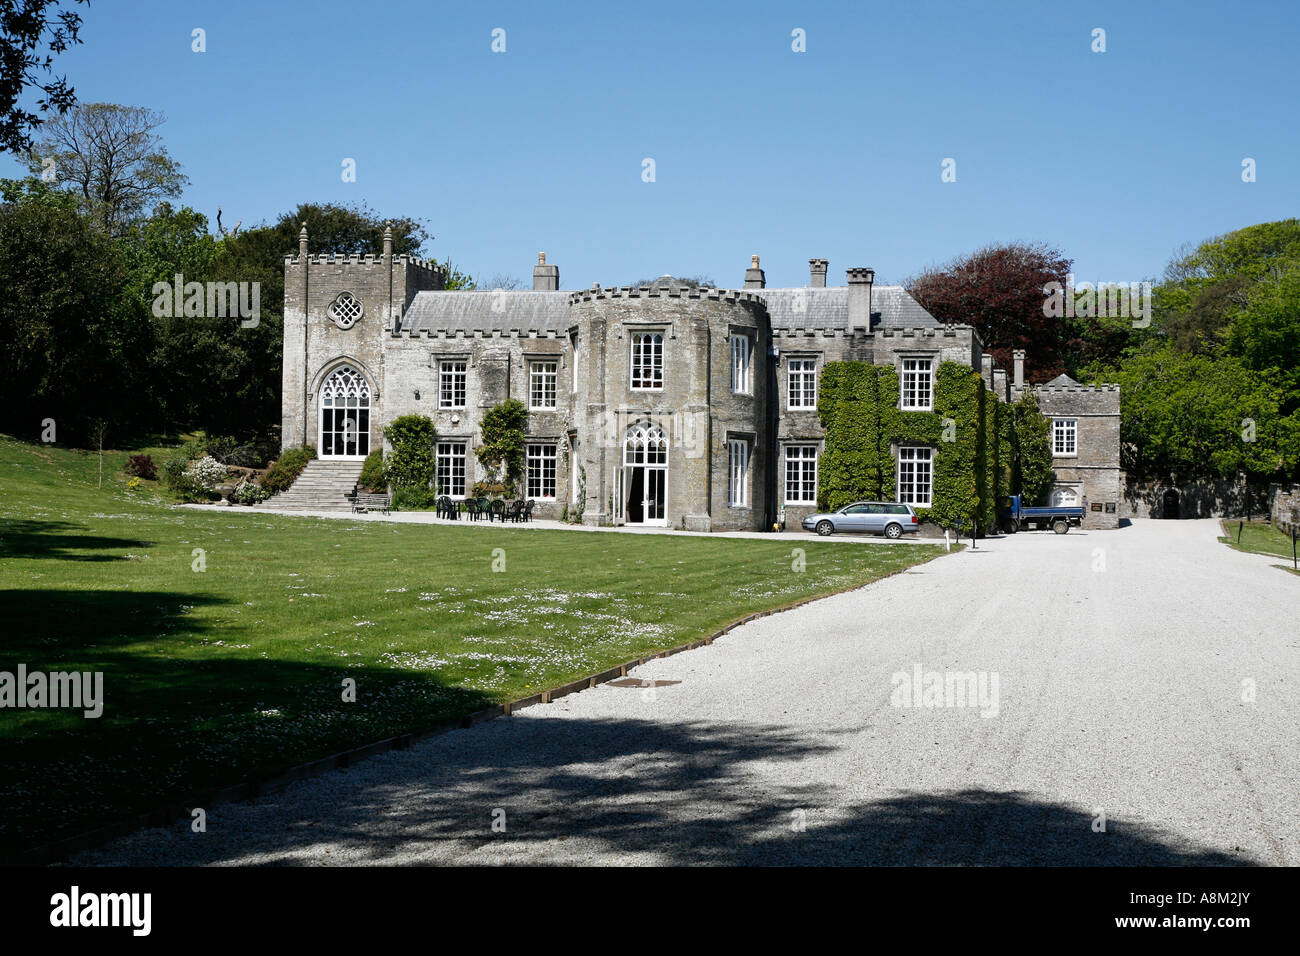 Prideaux Place Padstow Cornwall England Uk Europe Stock Photo